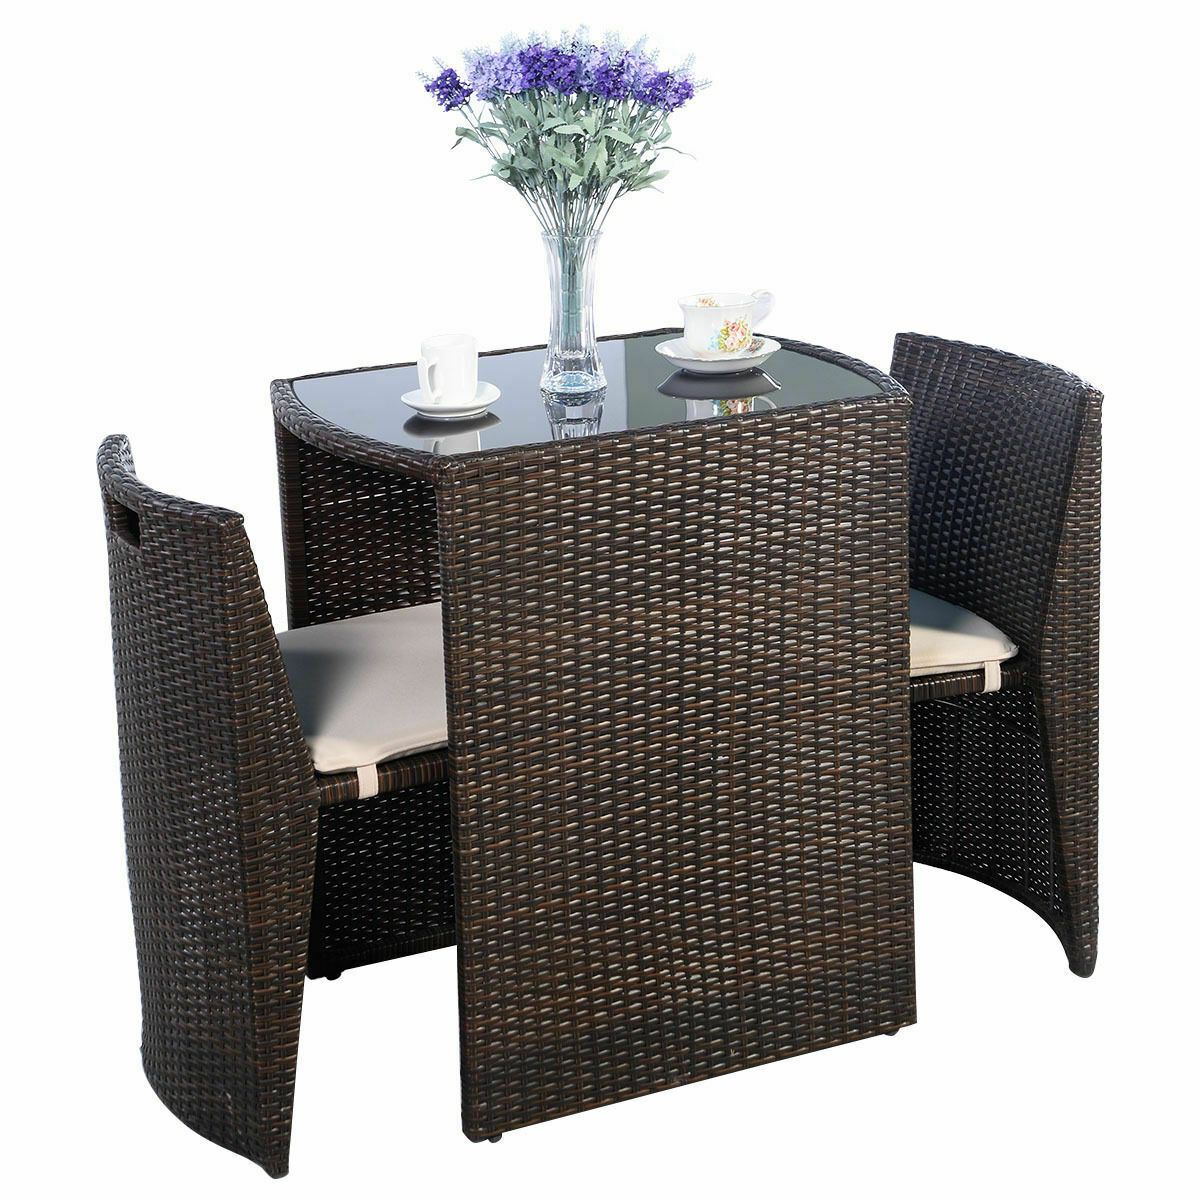 3 Pcs Cushioned Outdoor Wicker Set For Garden Lawn Patio (Brown)